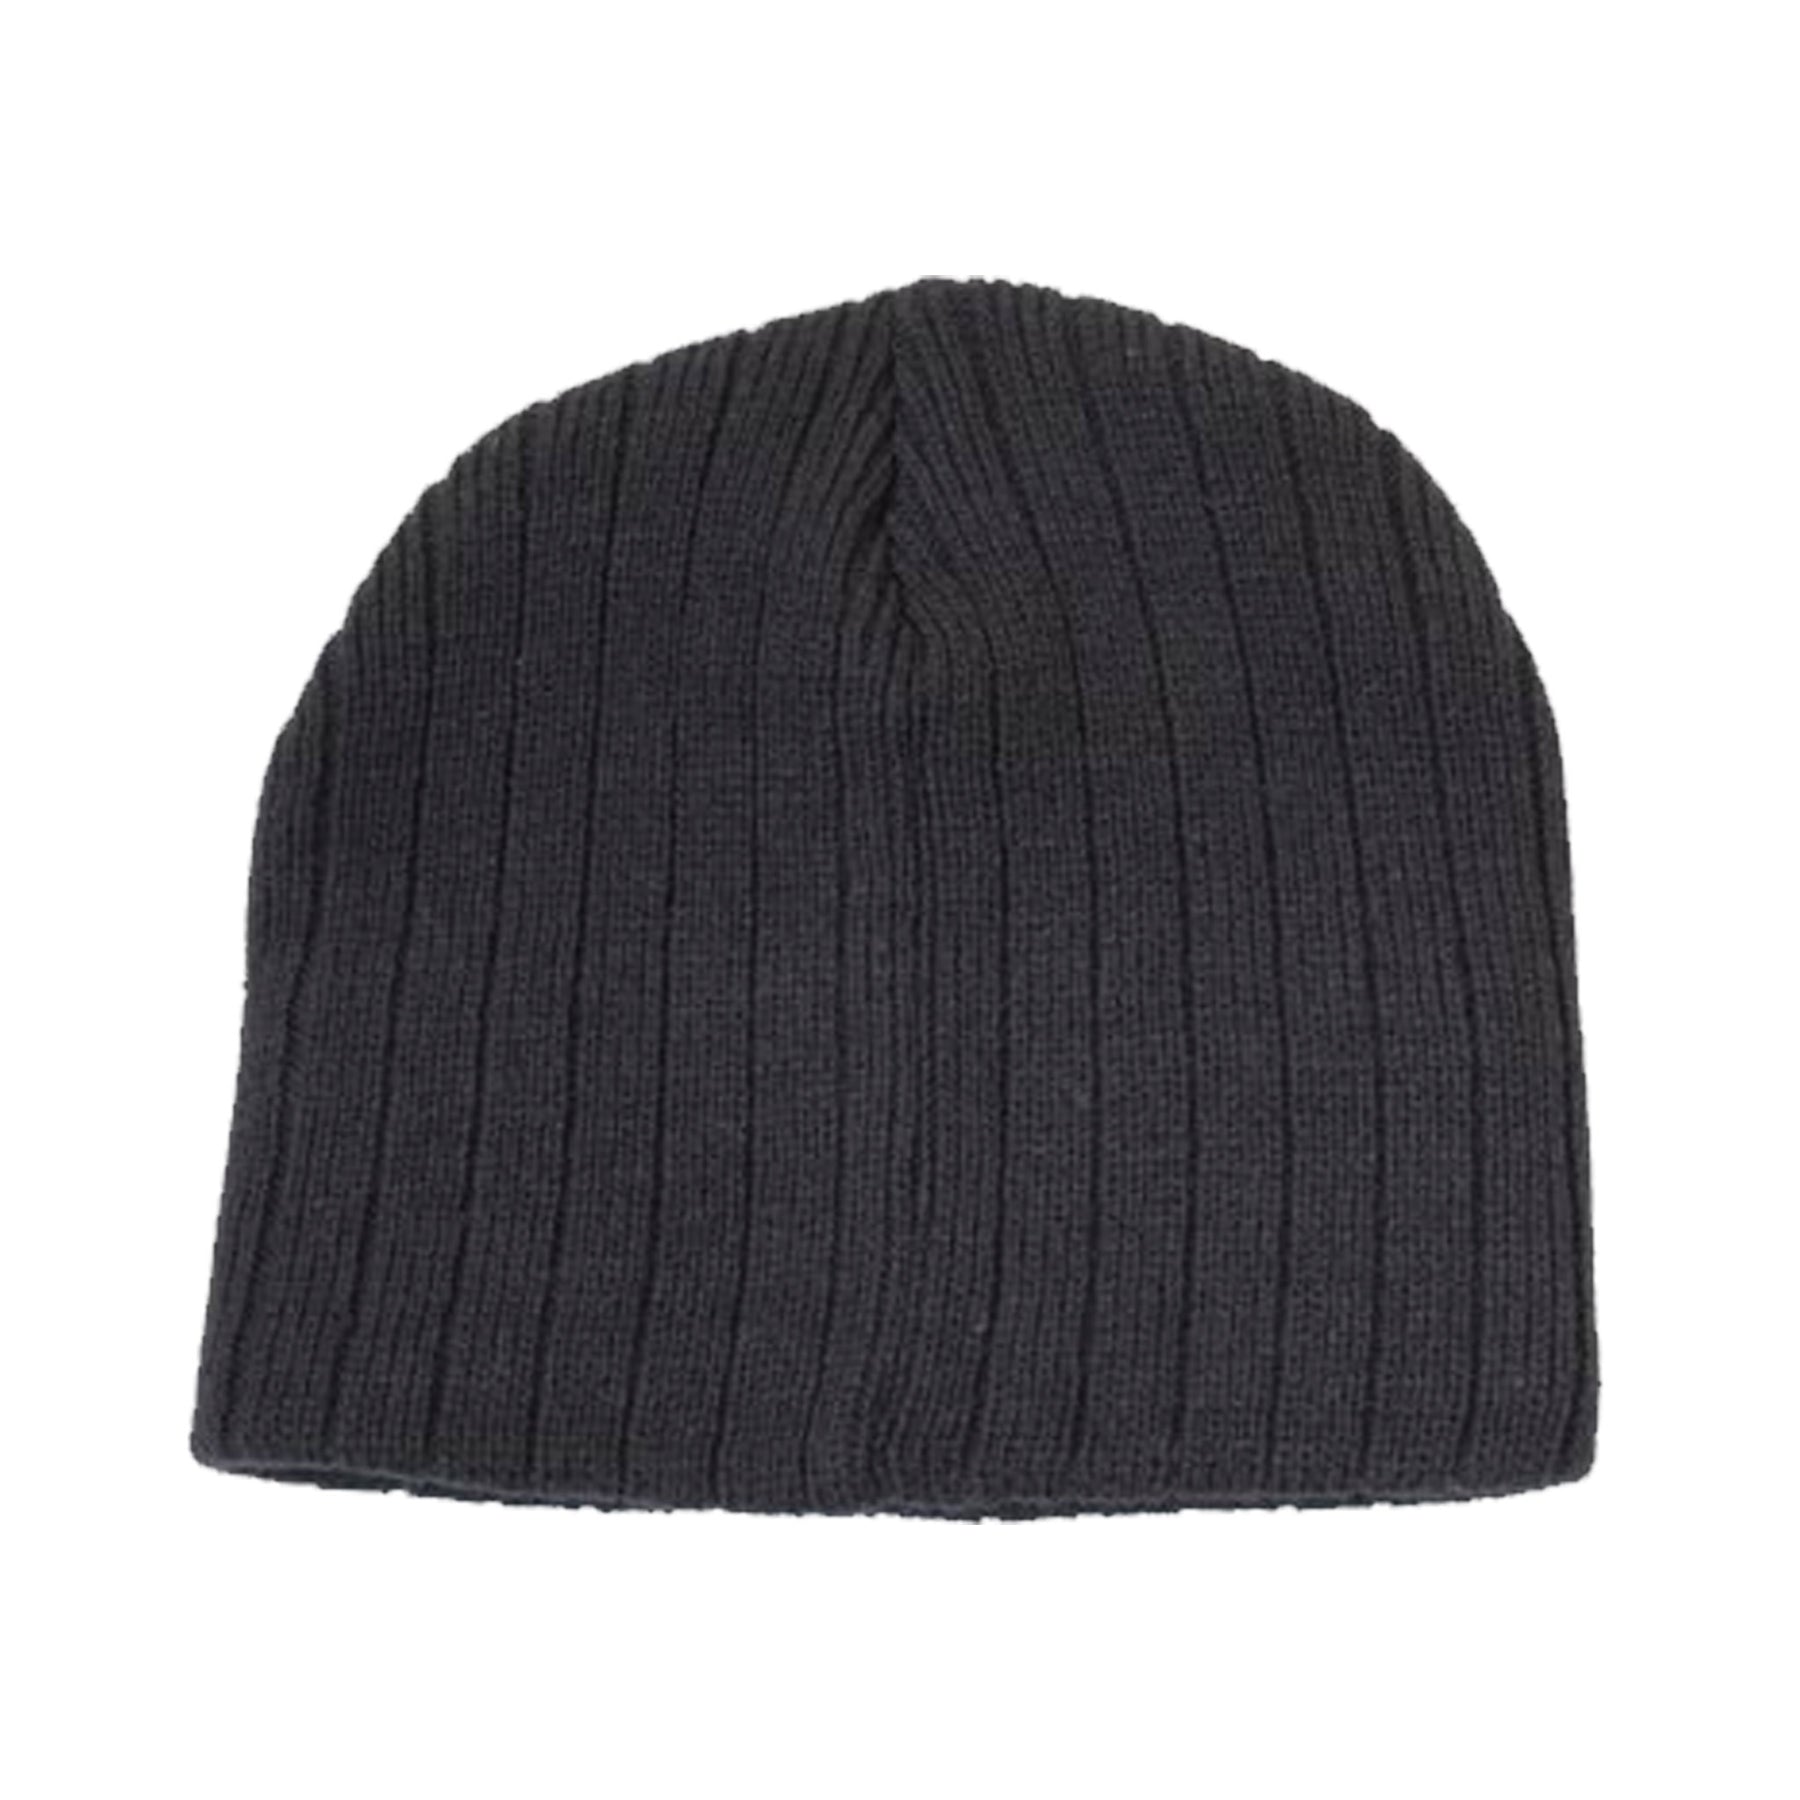 navy cable knit beanie